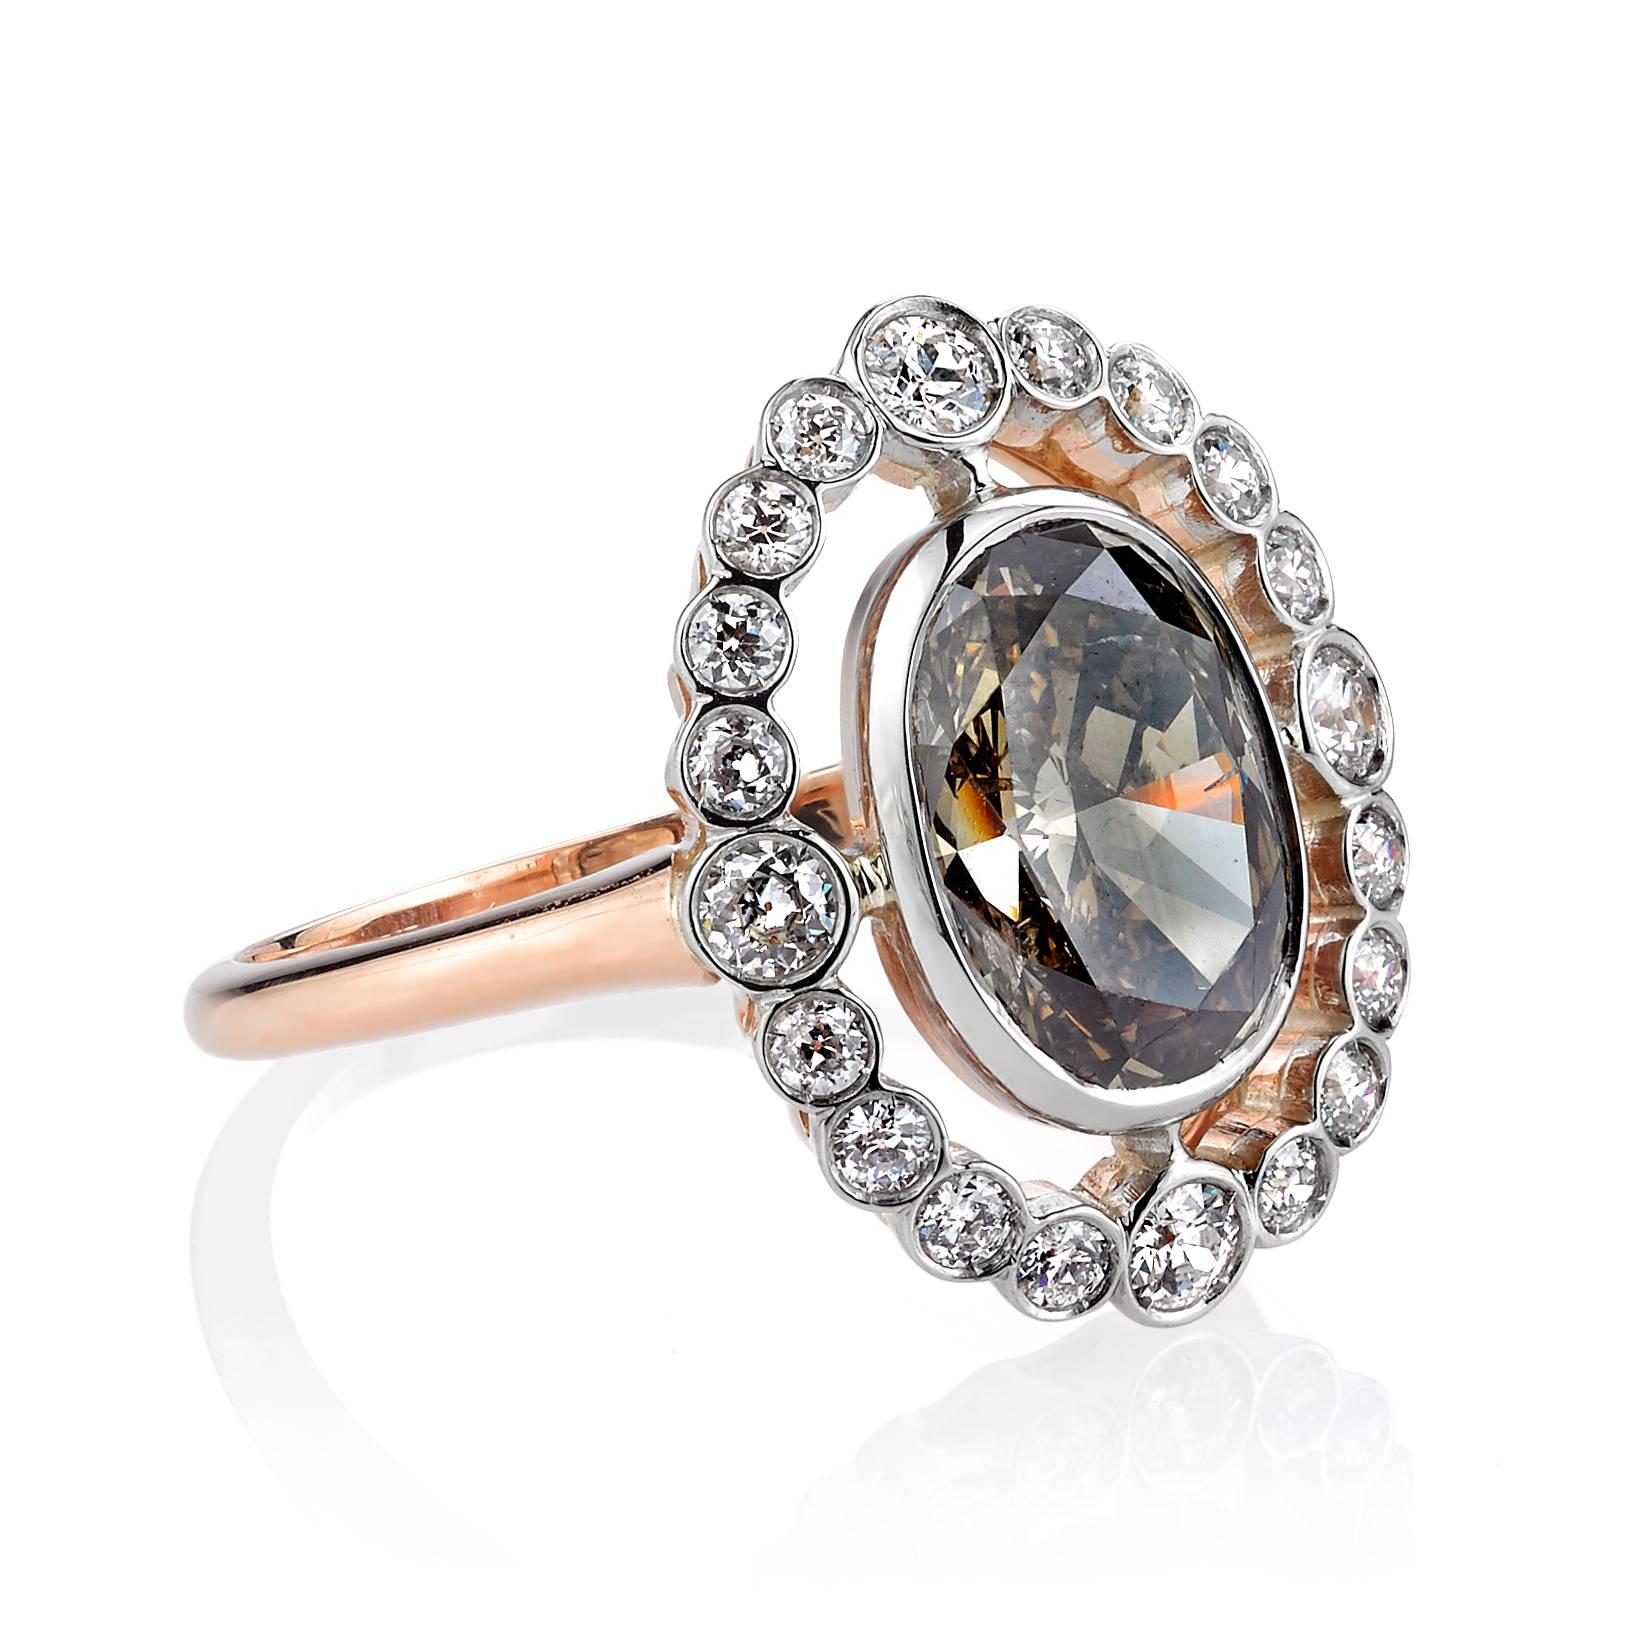 2.41ct Brown/ SI3 Oval cut diamond set in a handcrafted 18k rose gold and platinum mounting.